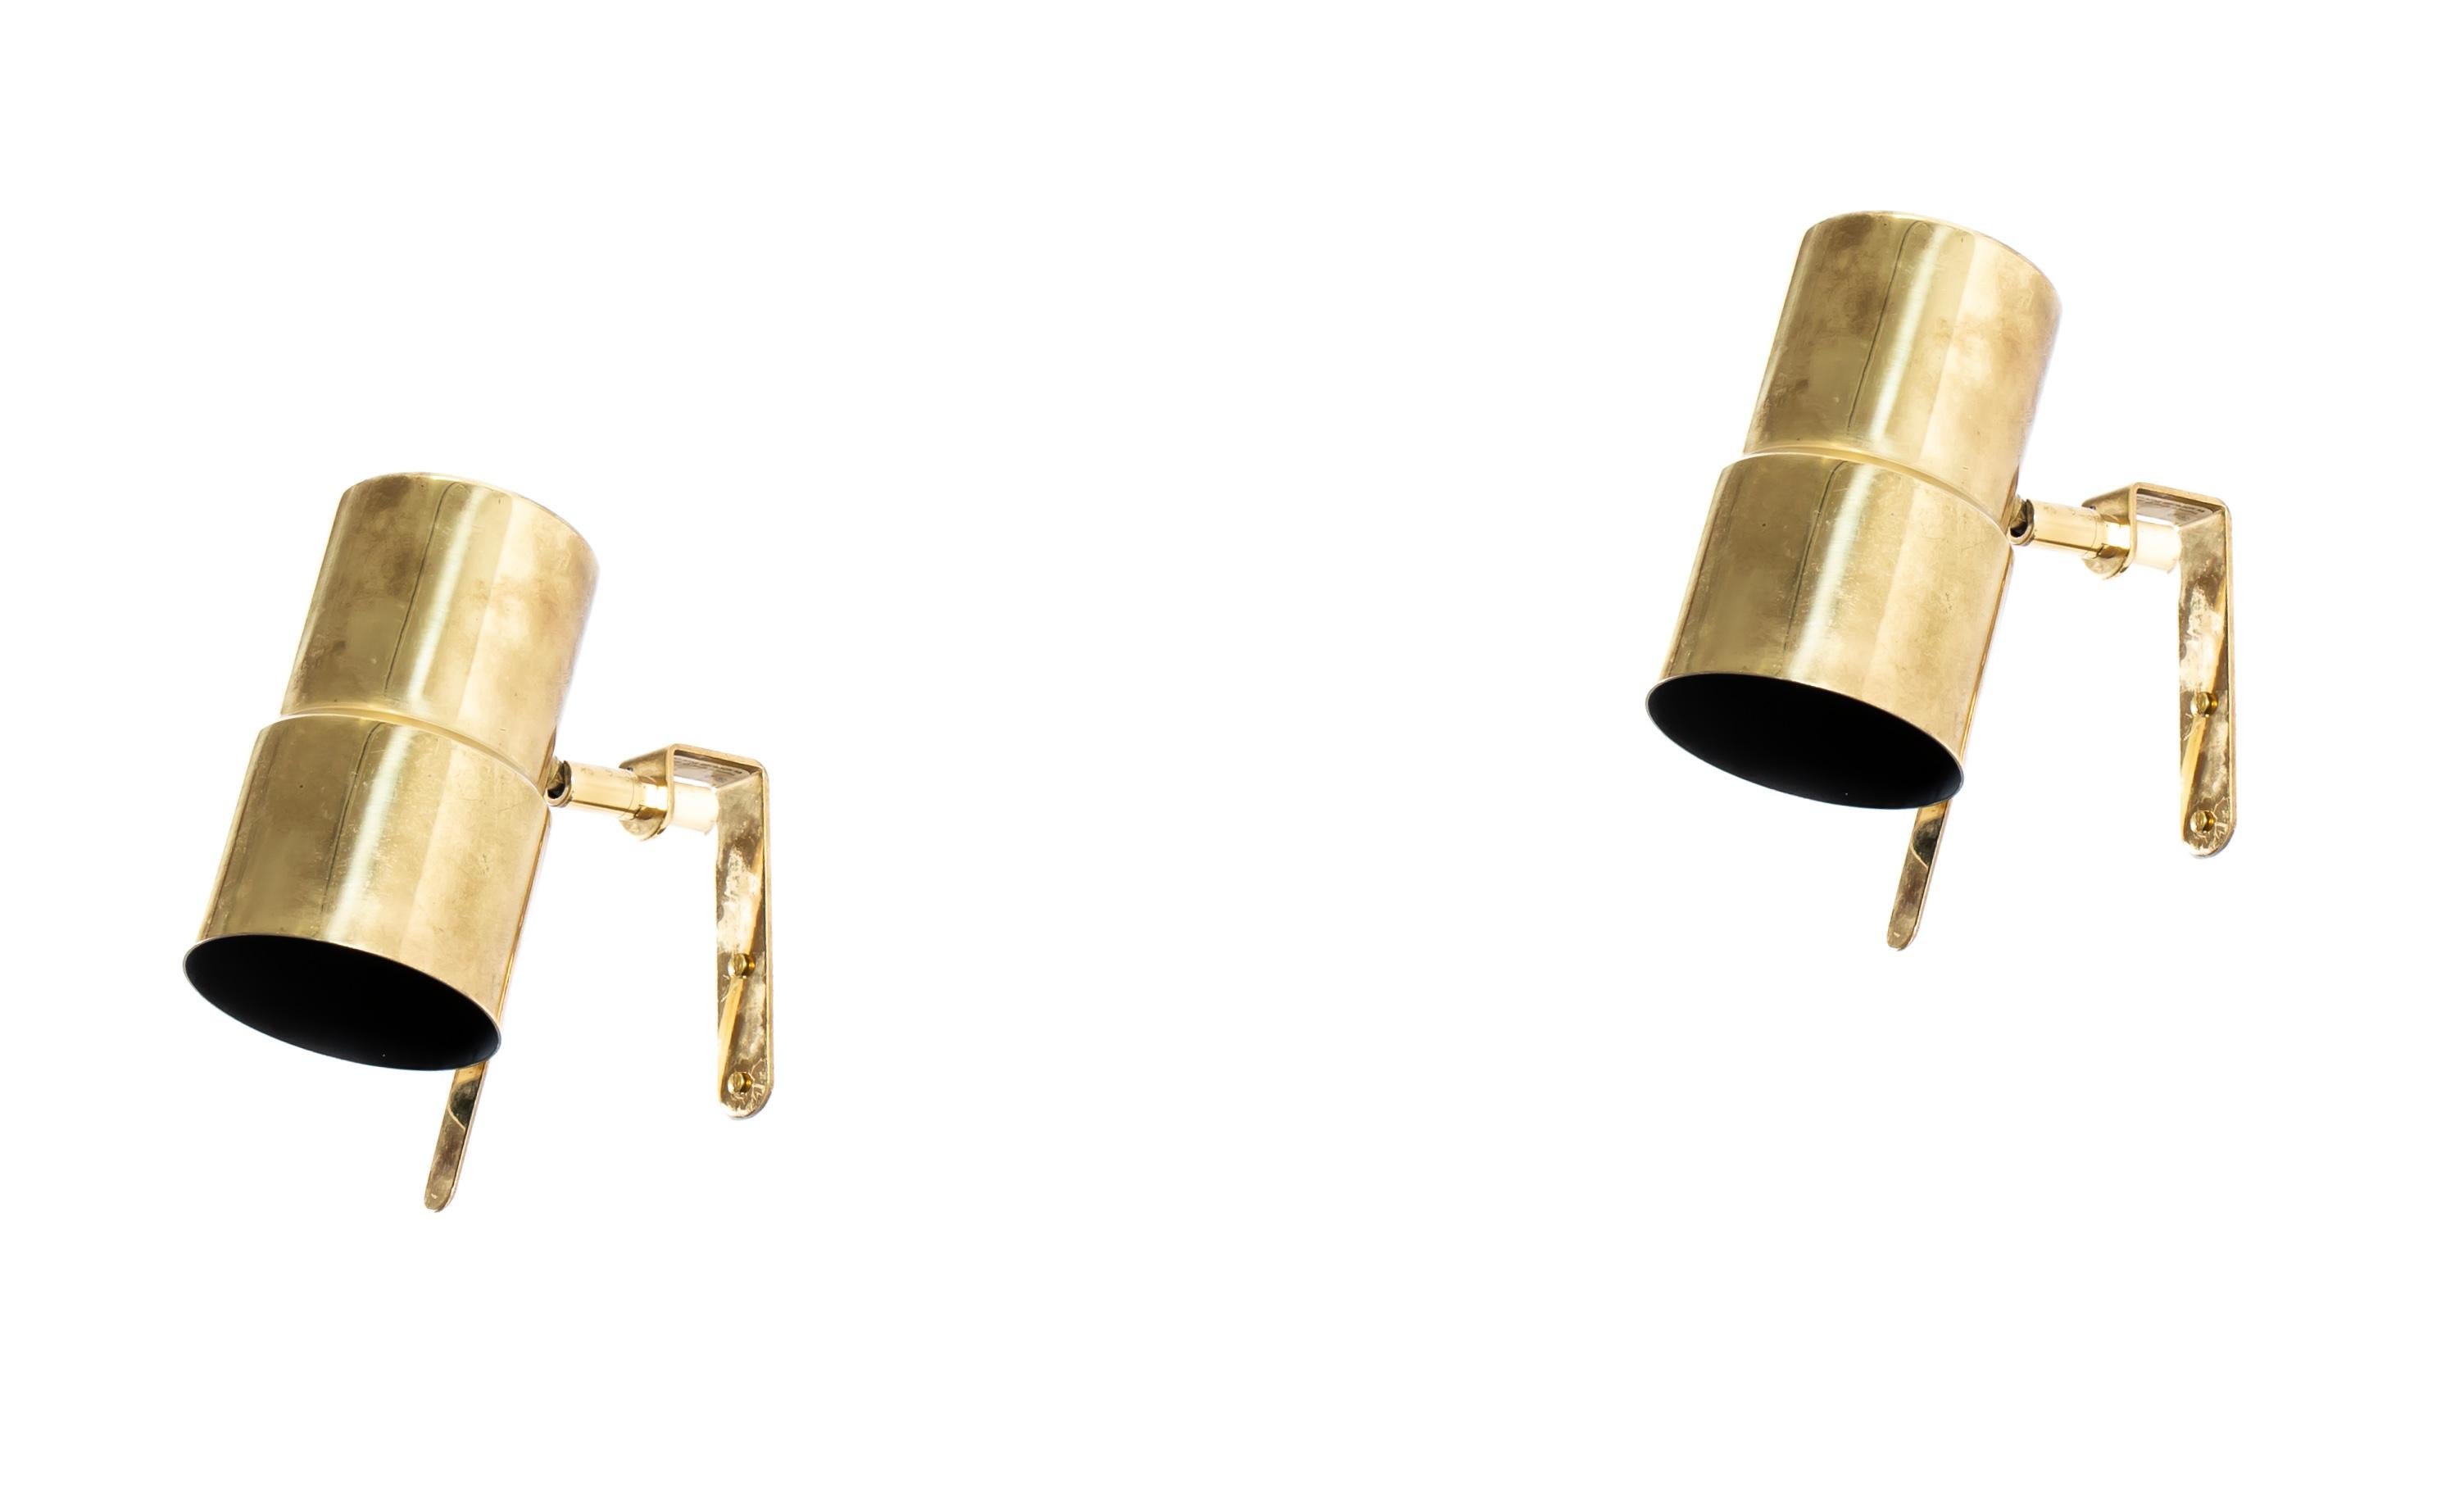 Modernist wall lamps in polished brass. This is Model V-324, designed by Hans-Agne Jakobsson and made by Hans-Agne Jakobsson AB in Markaryd. Both lamps are fully working and in good vintage condition.